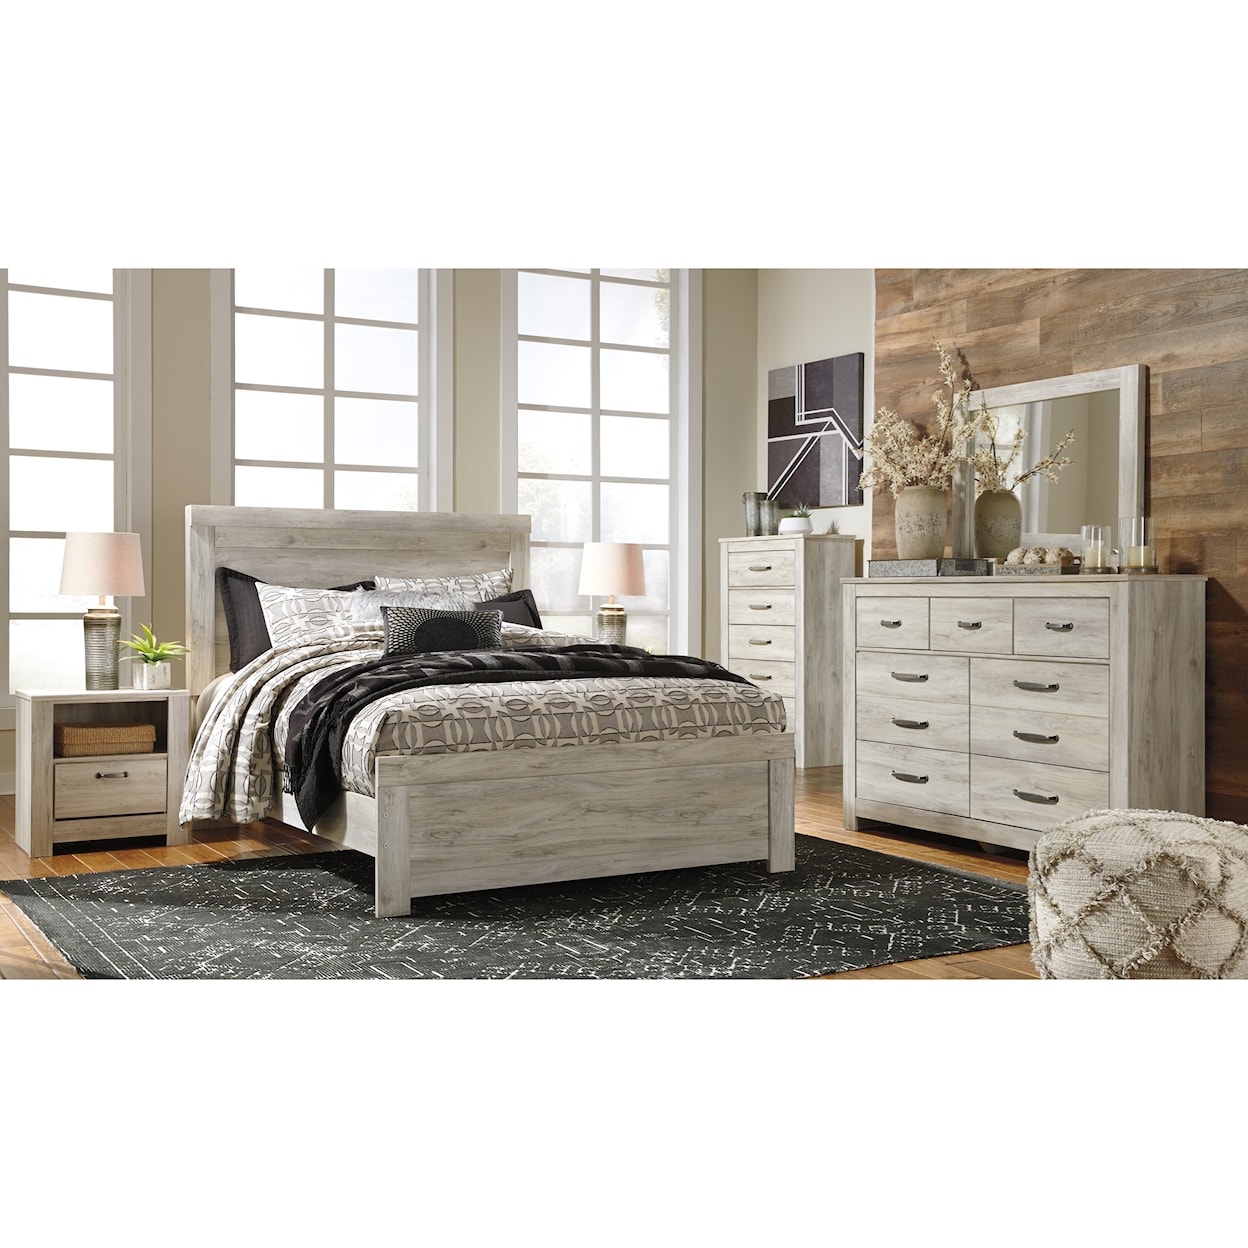 Signature Design by Ashley Furniture Bellaby Queen Bedroom Group